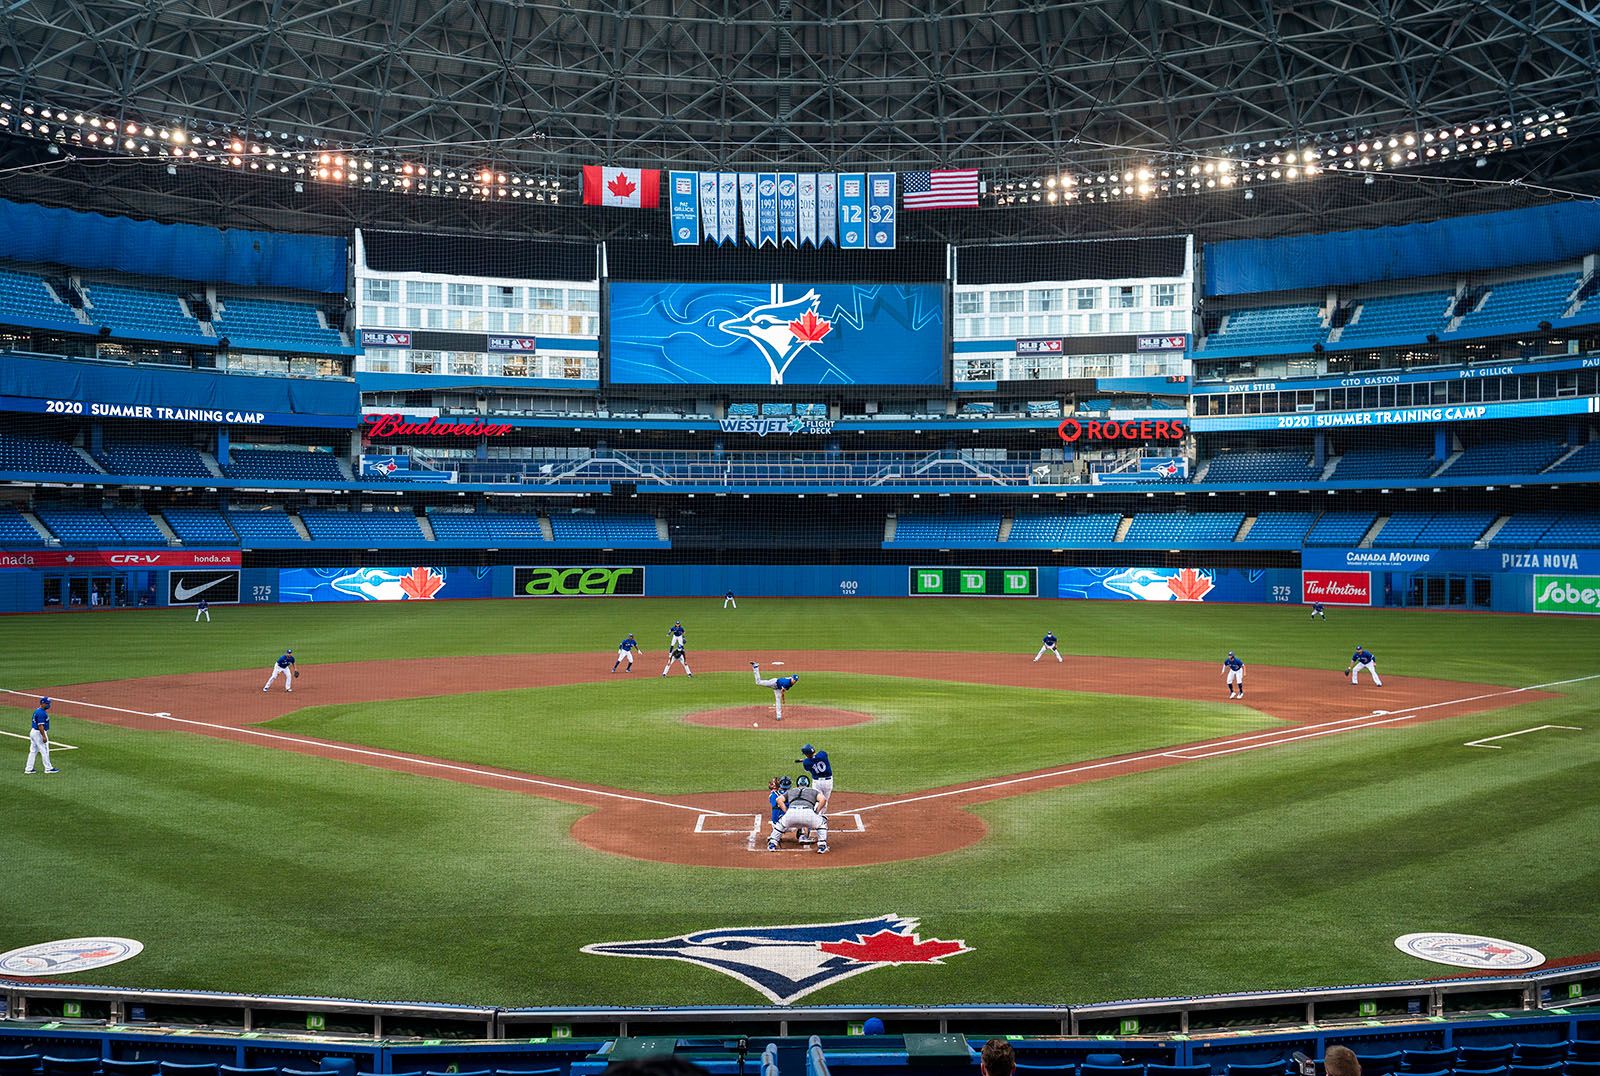 Canada denies Toronto Blue Jays' request to play home games due to pandemic